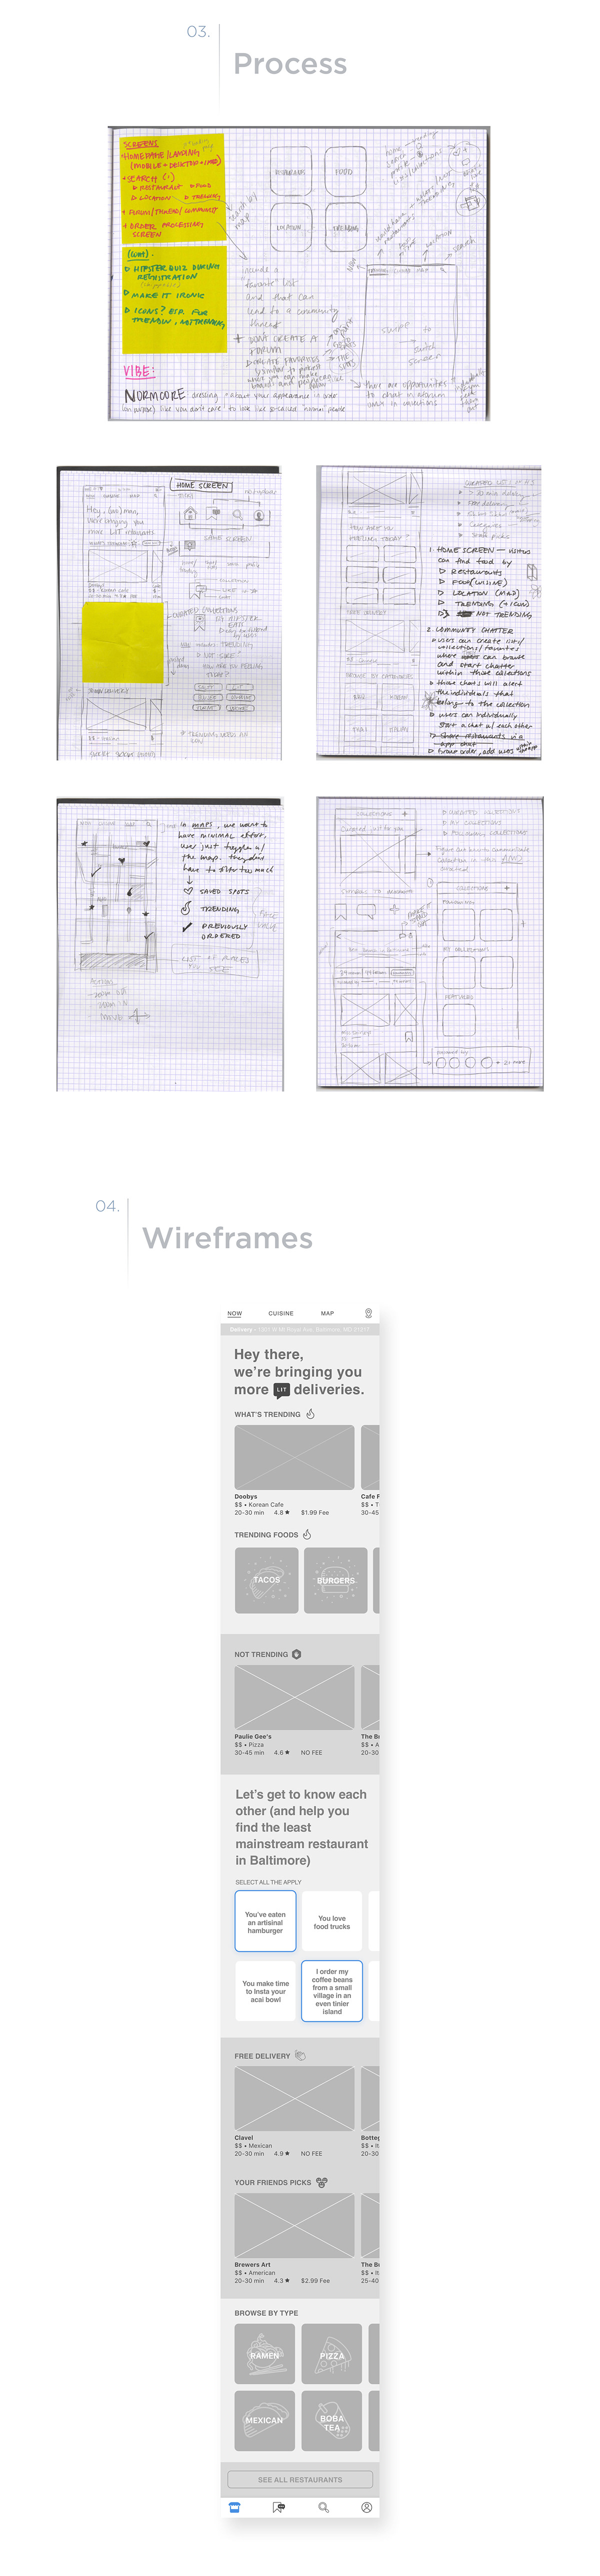 ux wireframes Hipster app ironic satire mobile